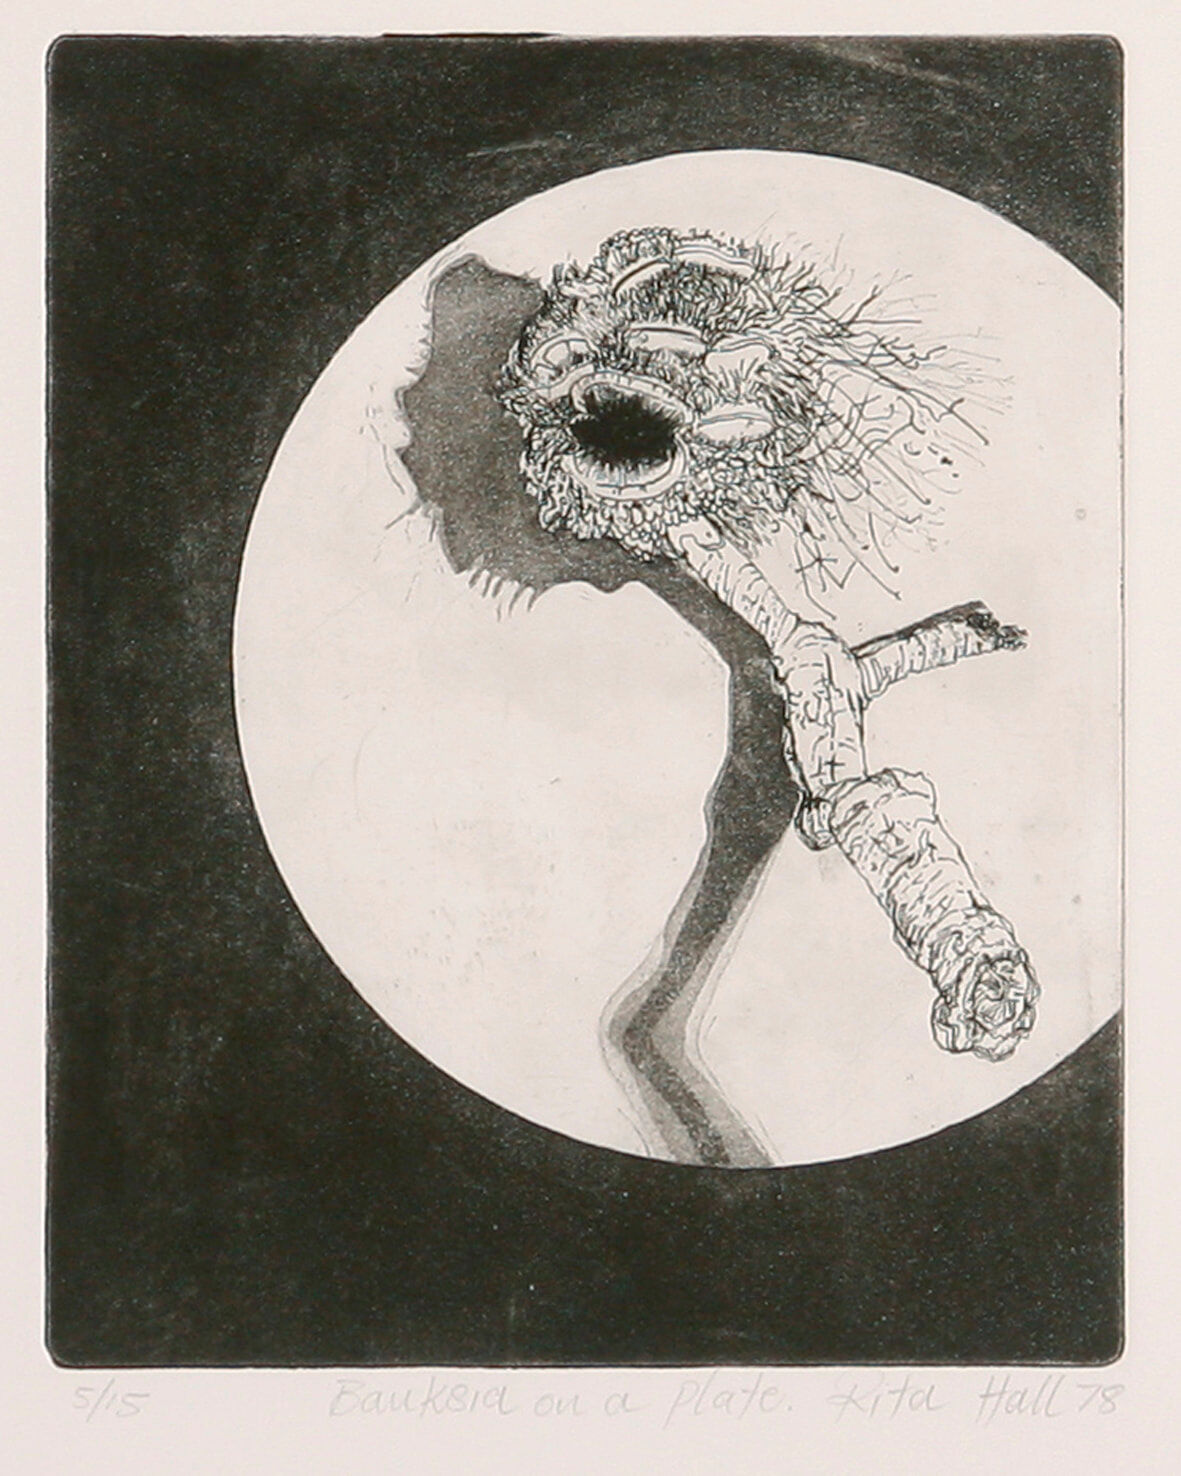 Banksia On A Plate 1978 Etching Image 25 x 20cm